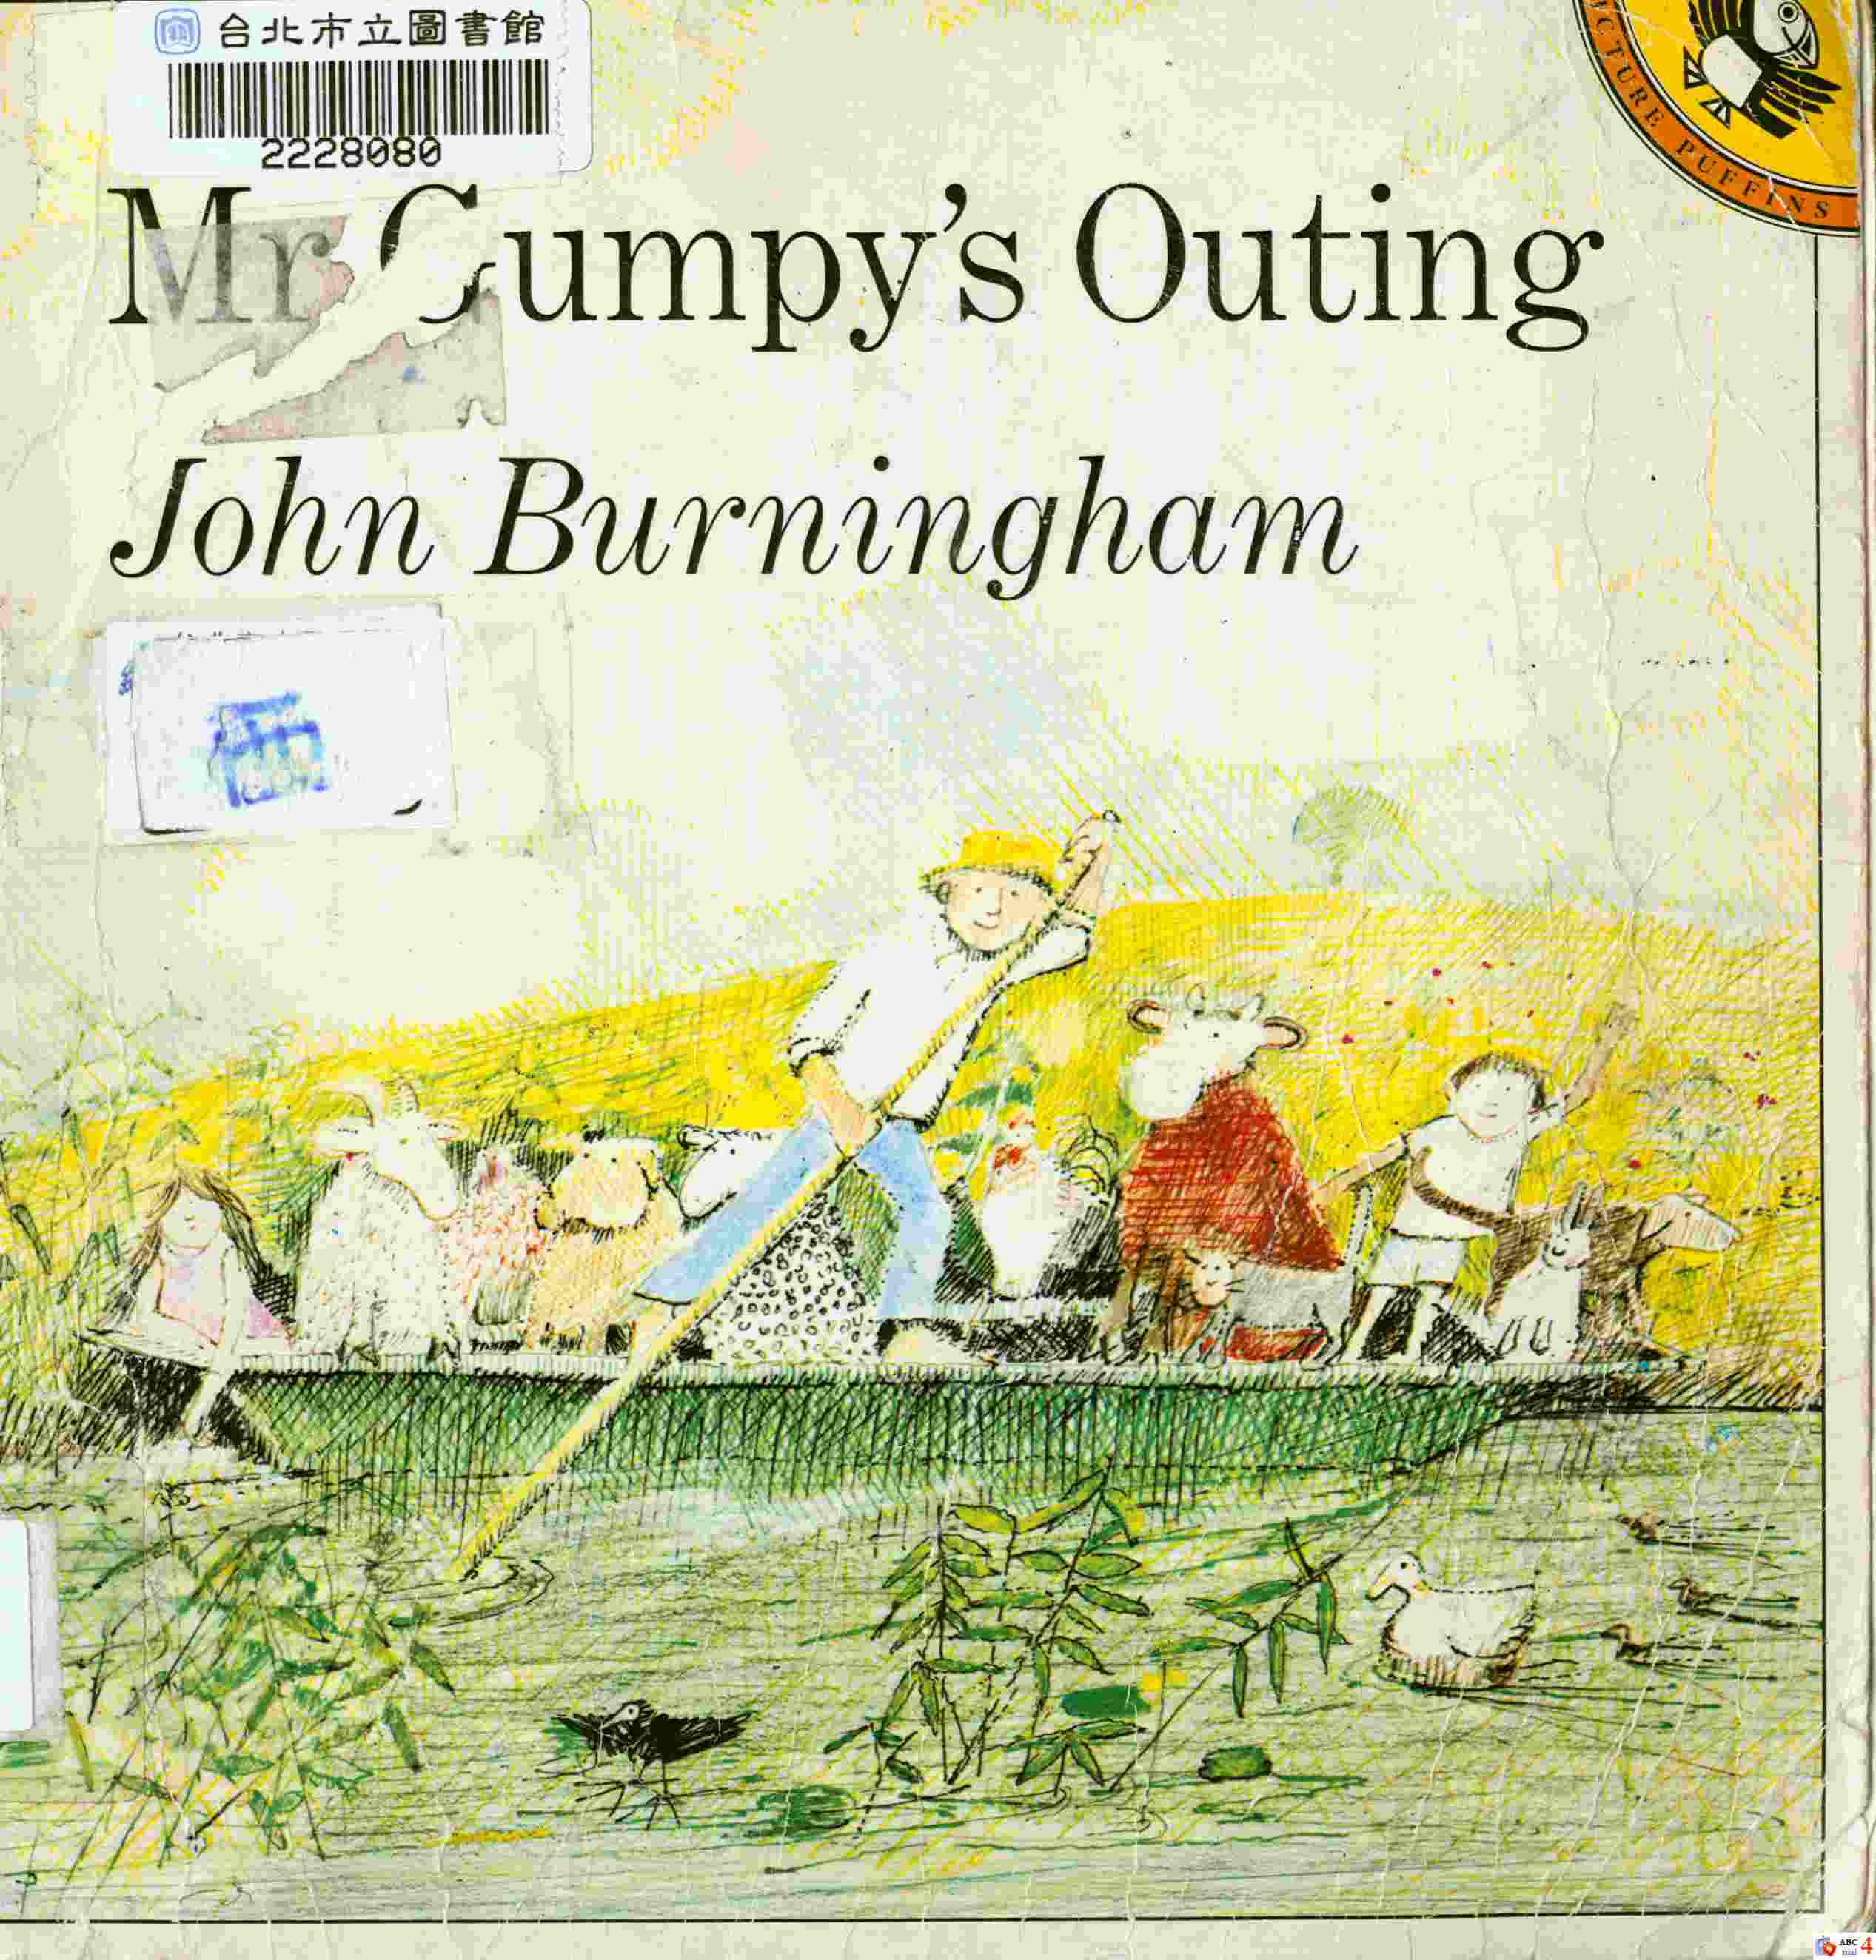 Mr. Gumpy's outing 書封